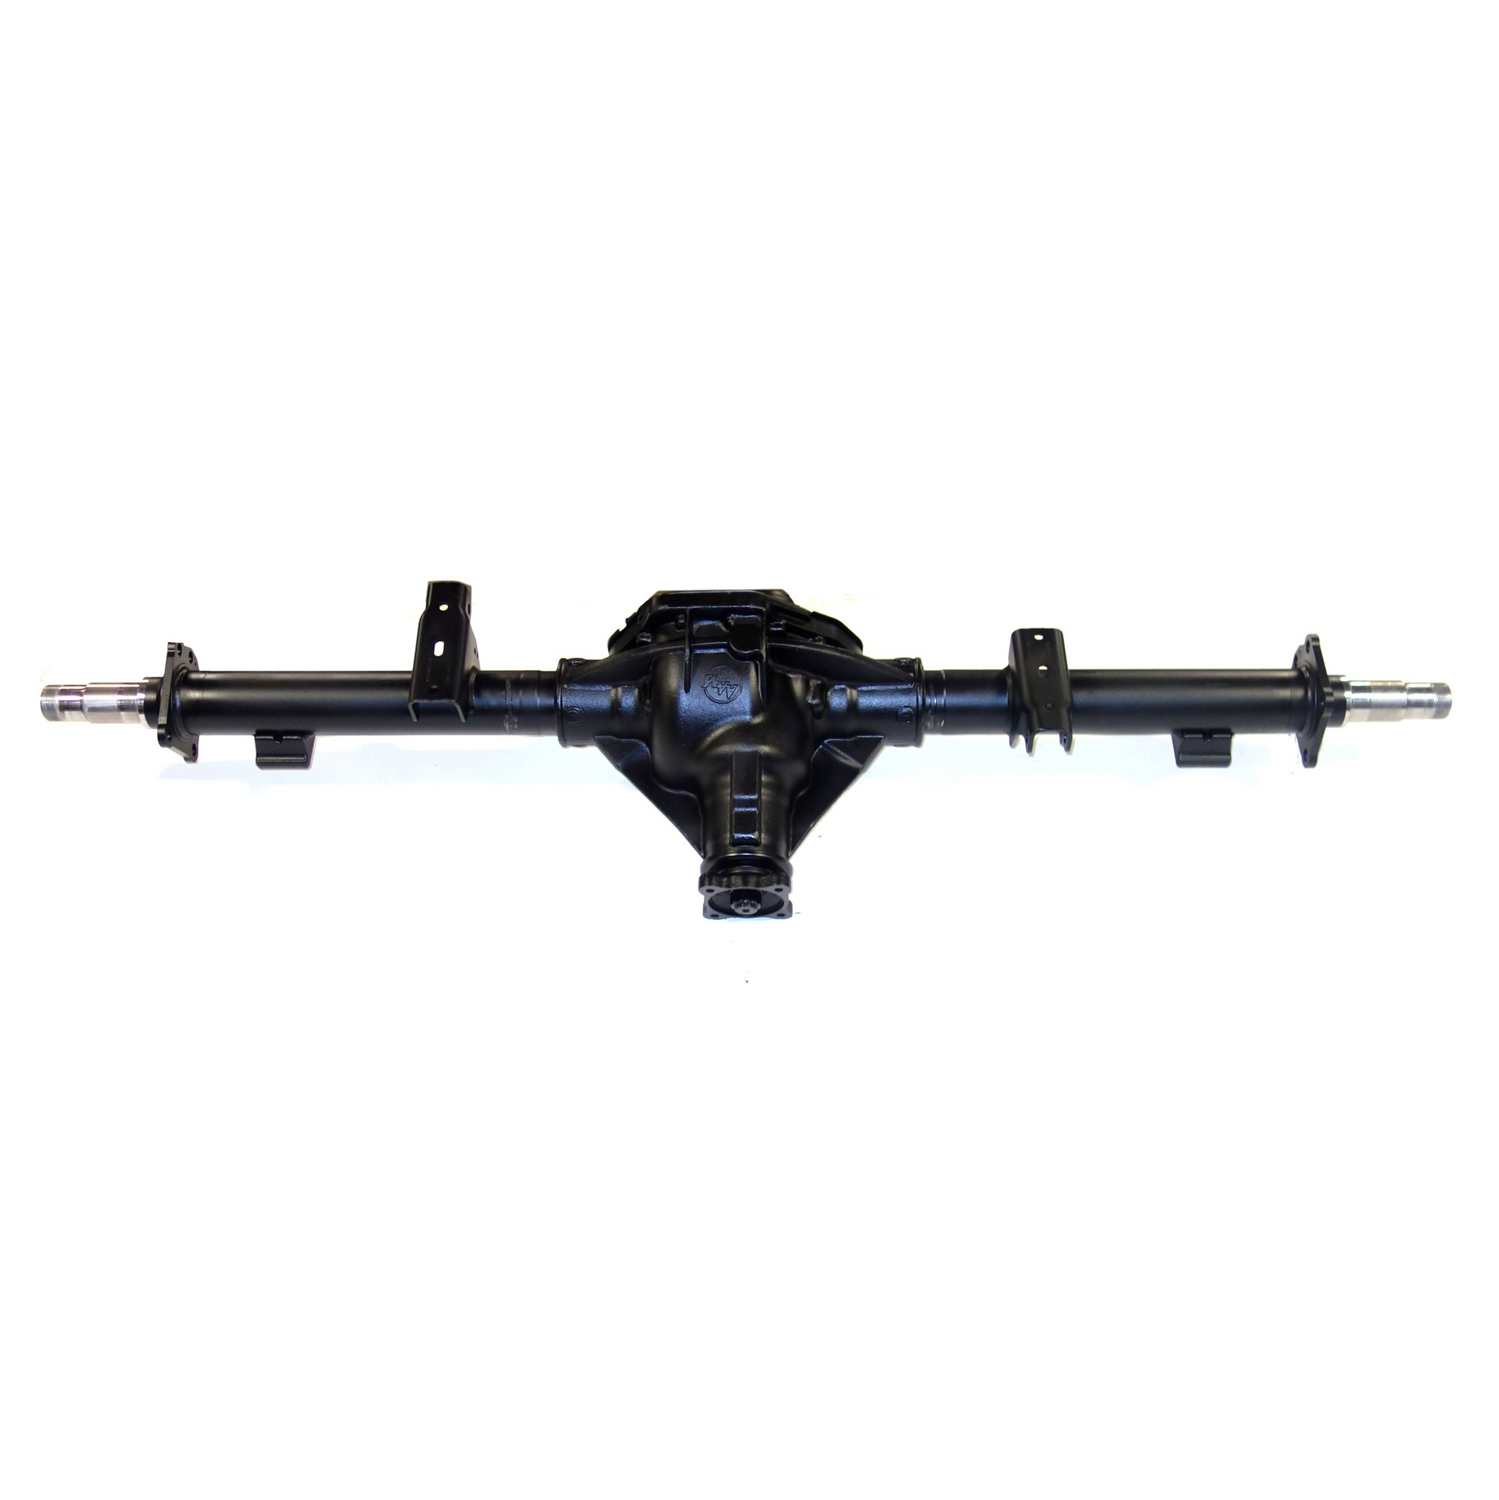 Remanufactured Axle Assy for Chy 14 Bolt Truck 2009 Dodge Ram 2500 3.73 , 2wd, Posi LSD